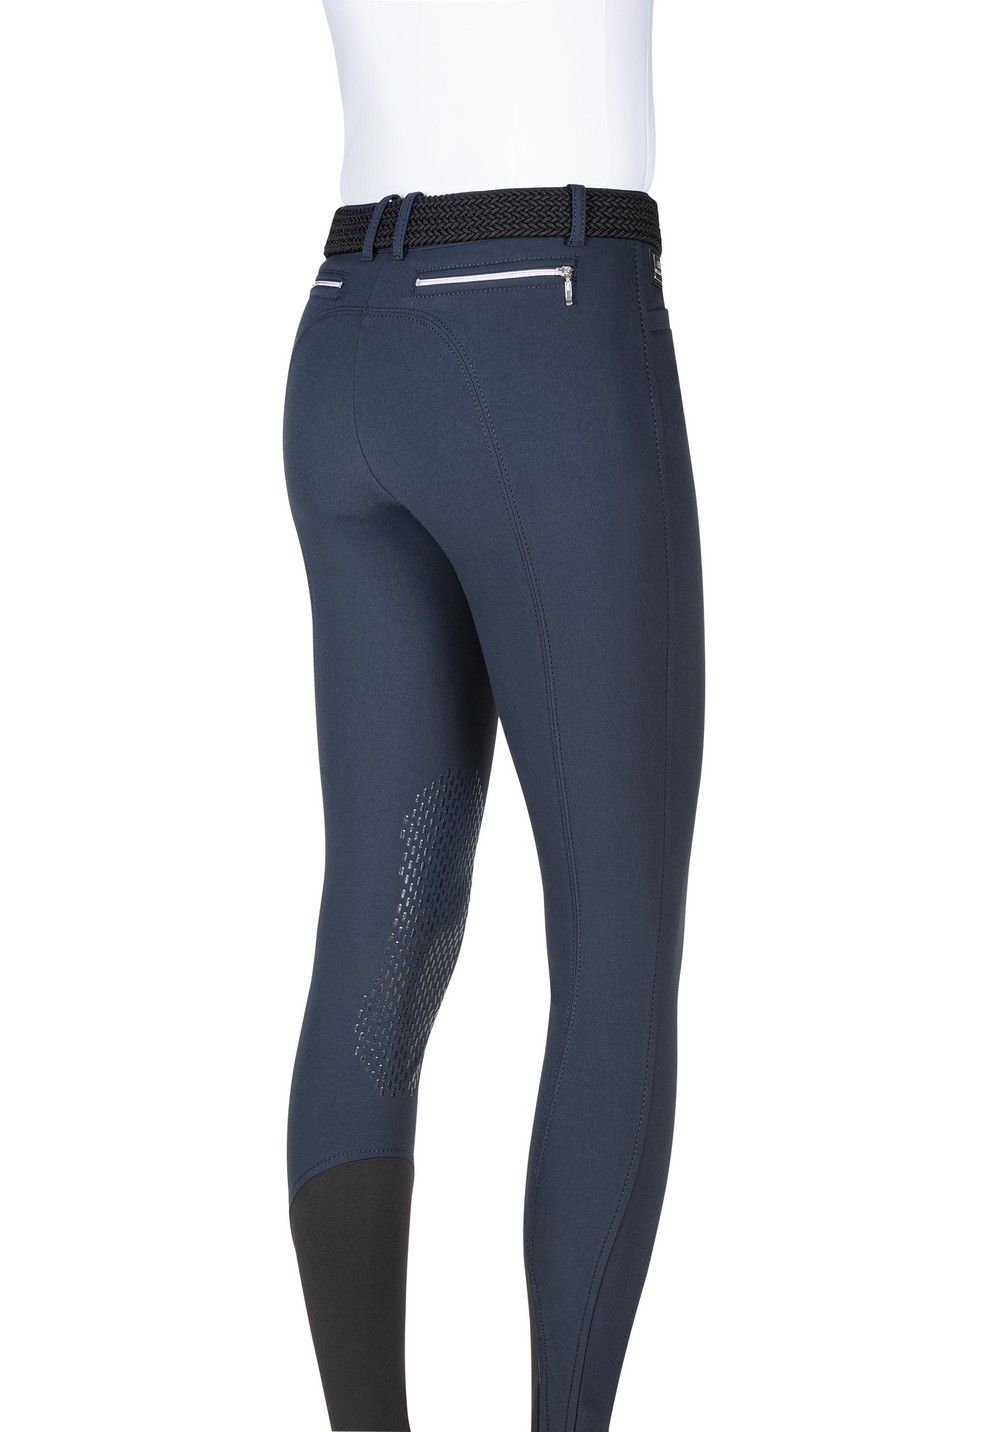 Equiline riding breeches knee grip Ash Navy